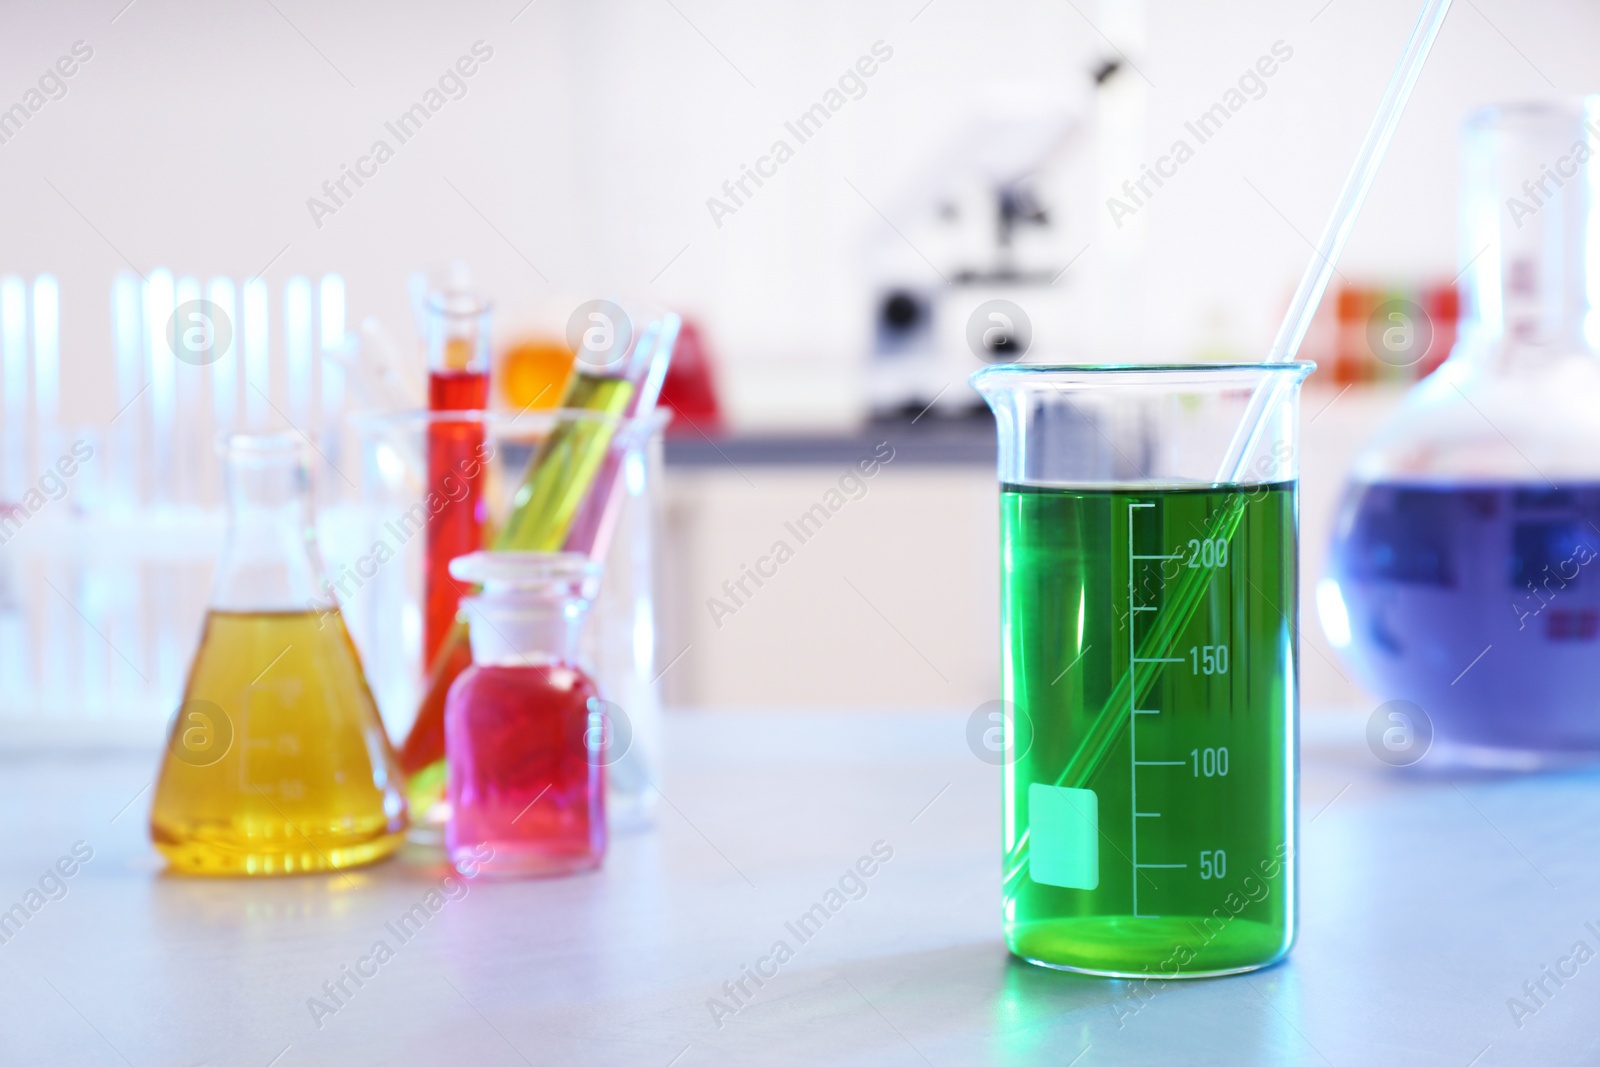 Photo of Beaker with color liquid on table against blurred background, space for text.  Chemistry glassware